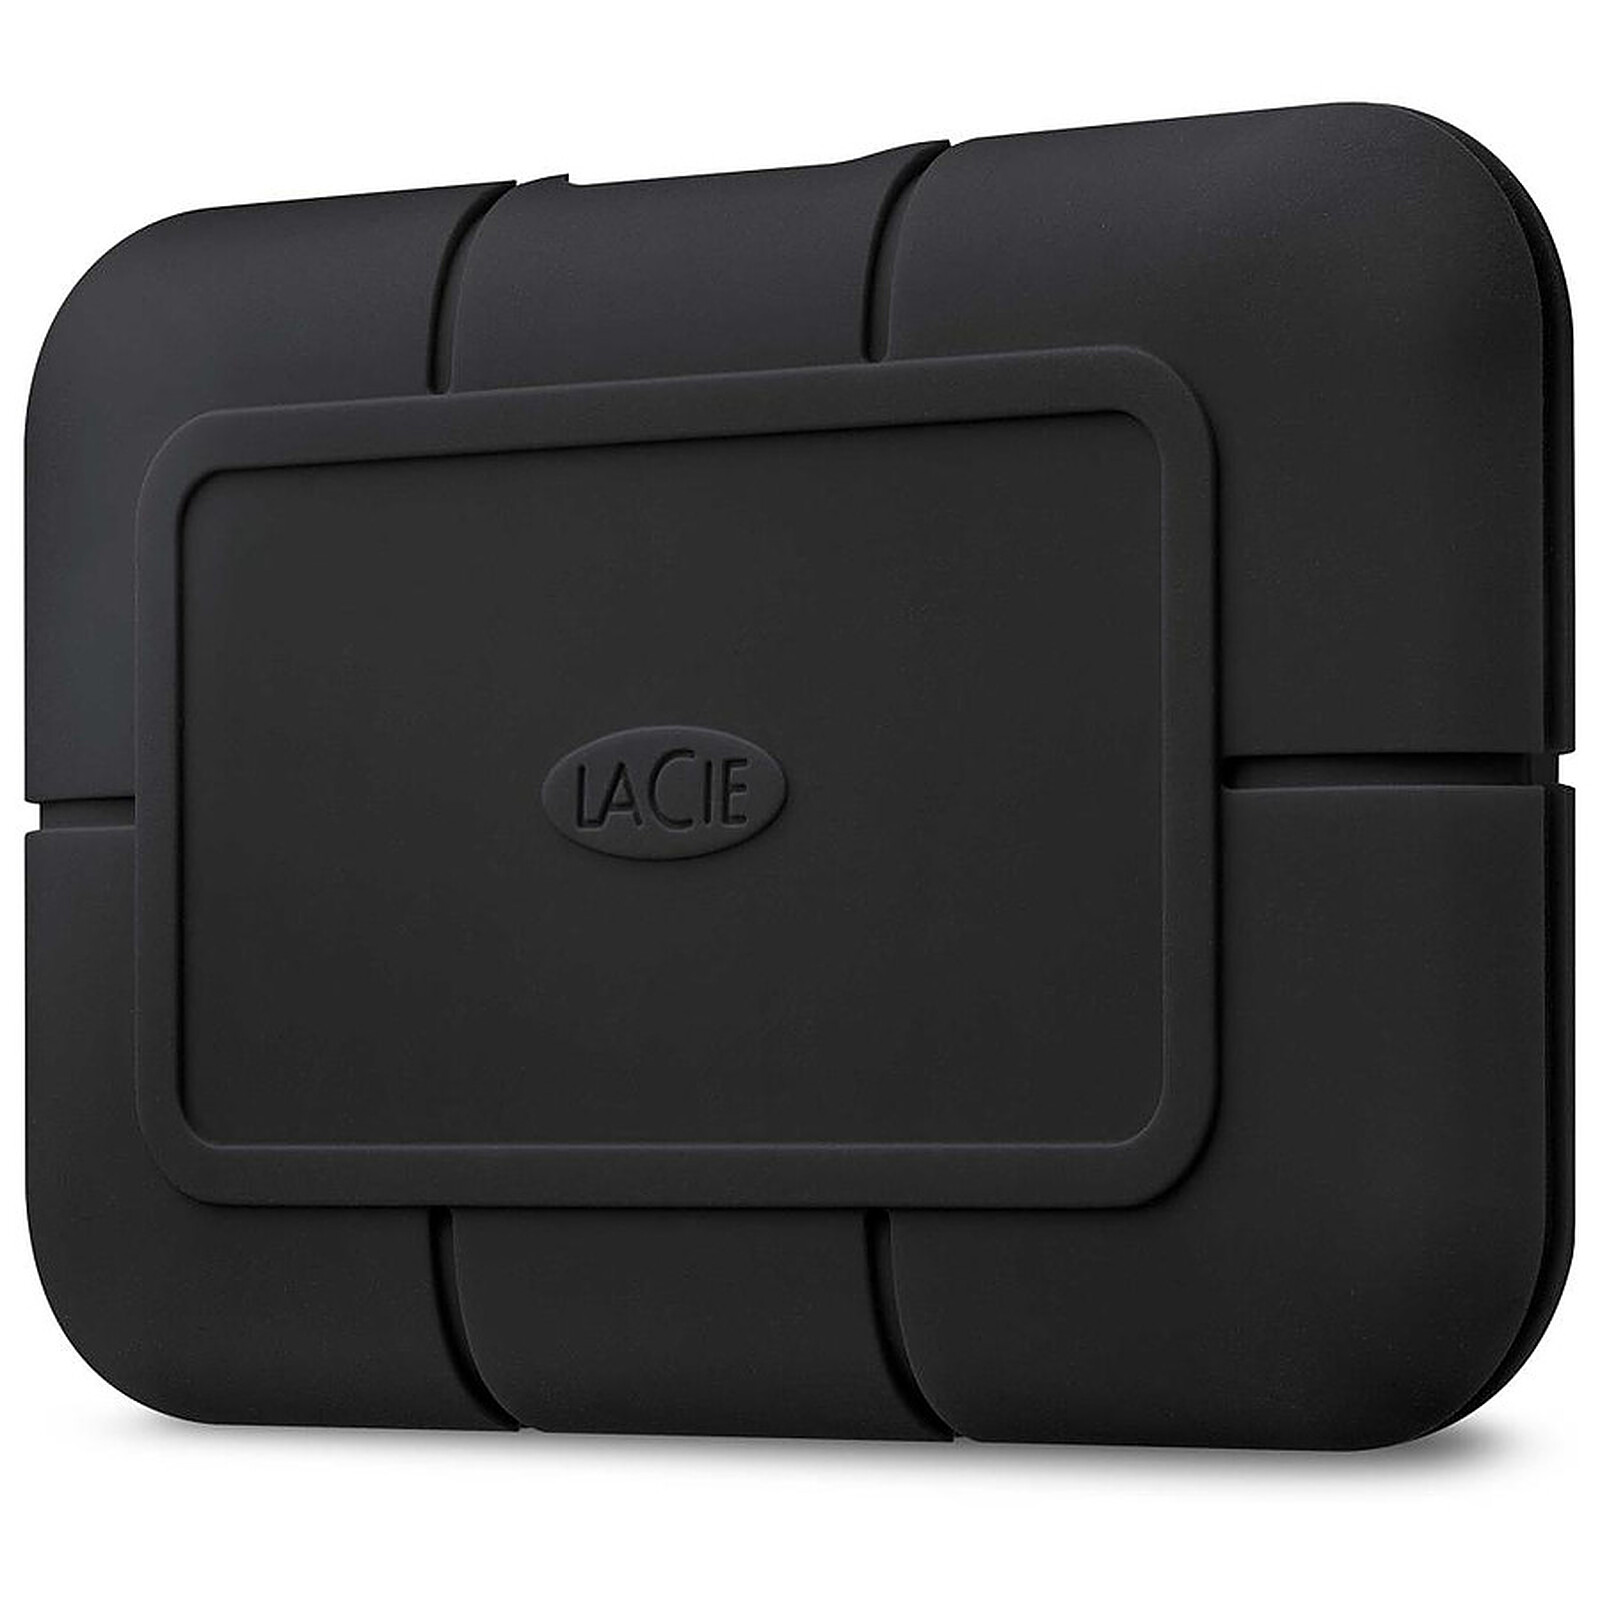 data recovery 6 tb for lacie backup drive